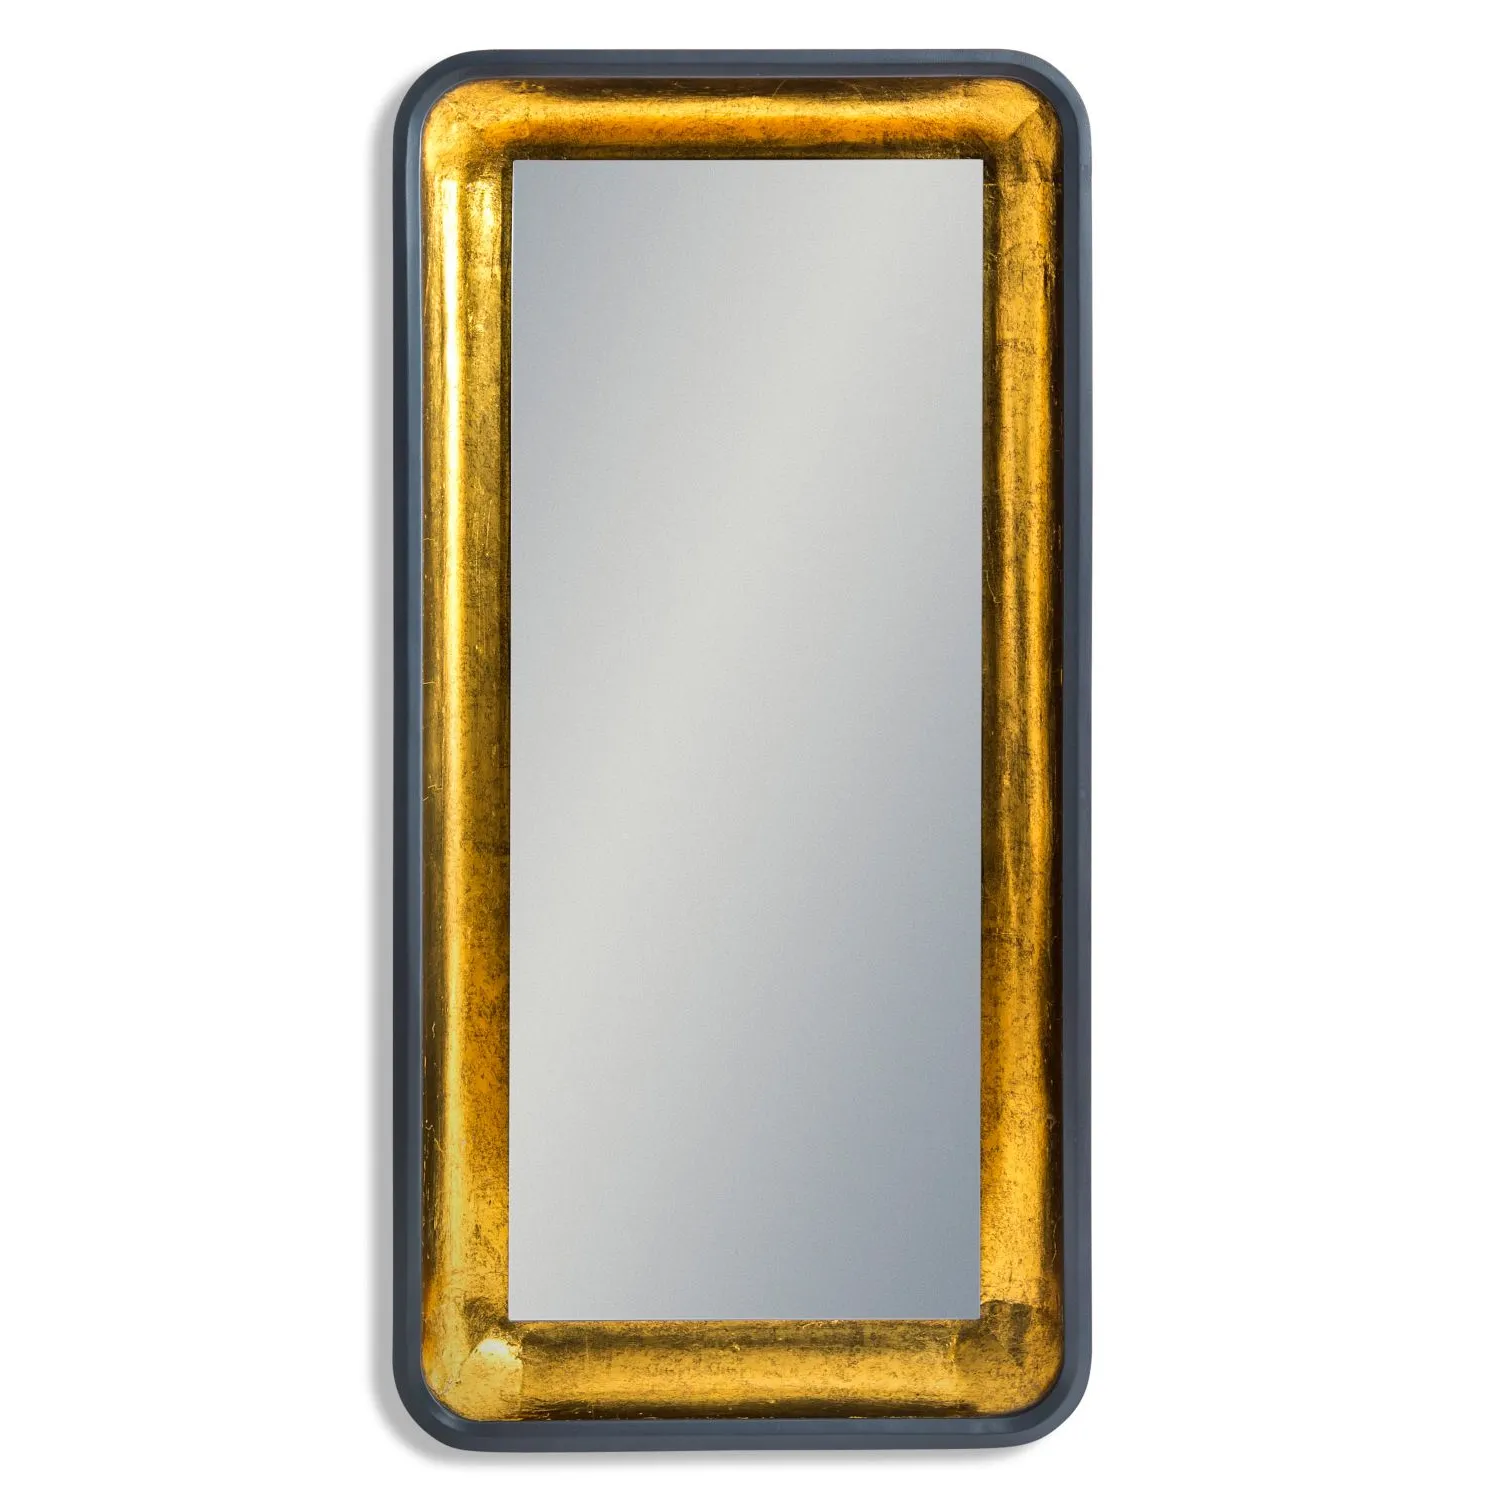 Grey And Gold Rectangular Wall Mirror With Led Lighting